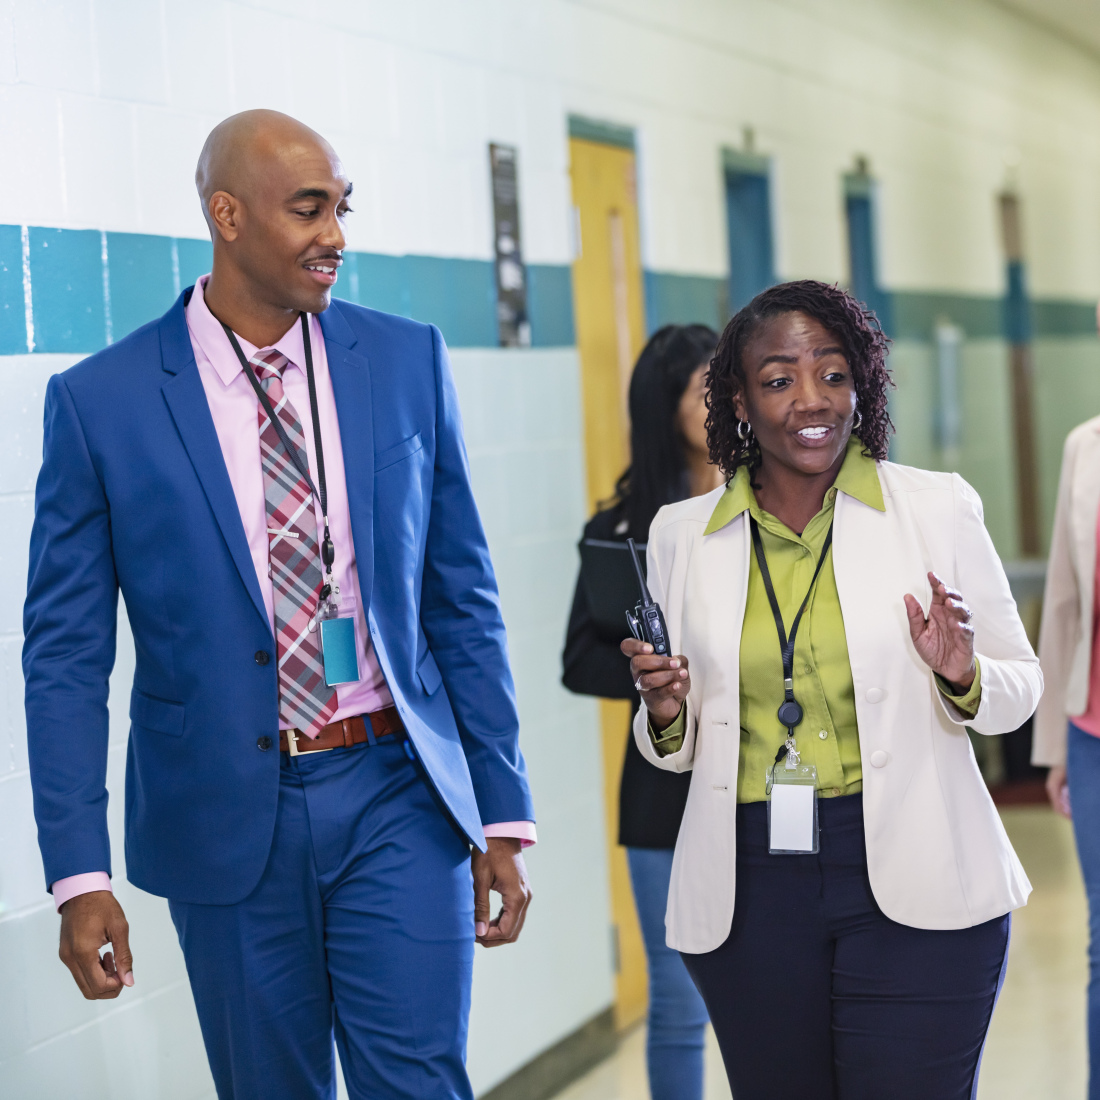 A multiracial group of five teachers or school administrators conversing as they walk through a school corridor. The focus is on the three in the foreground. The African-American woman in the middle, in her 50s, is talking while her coworkers look at her and listen.